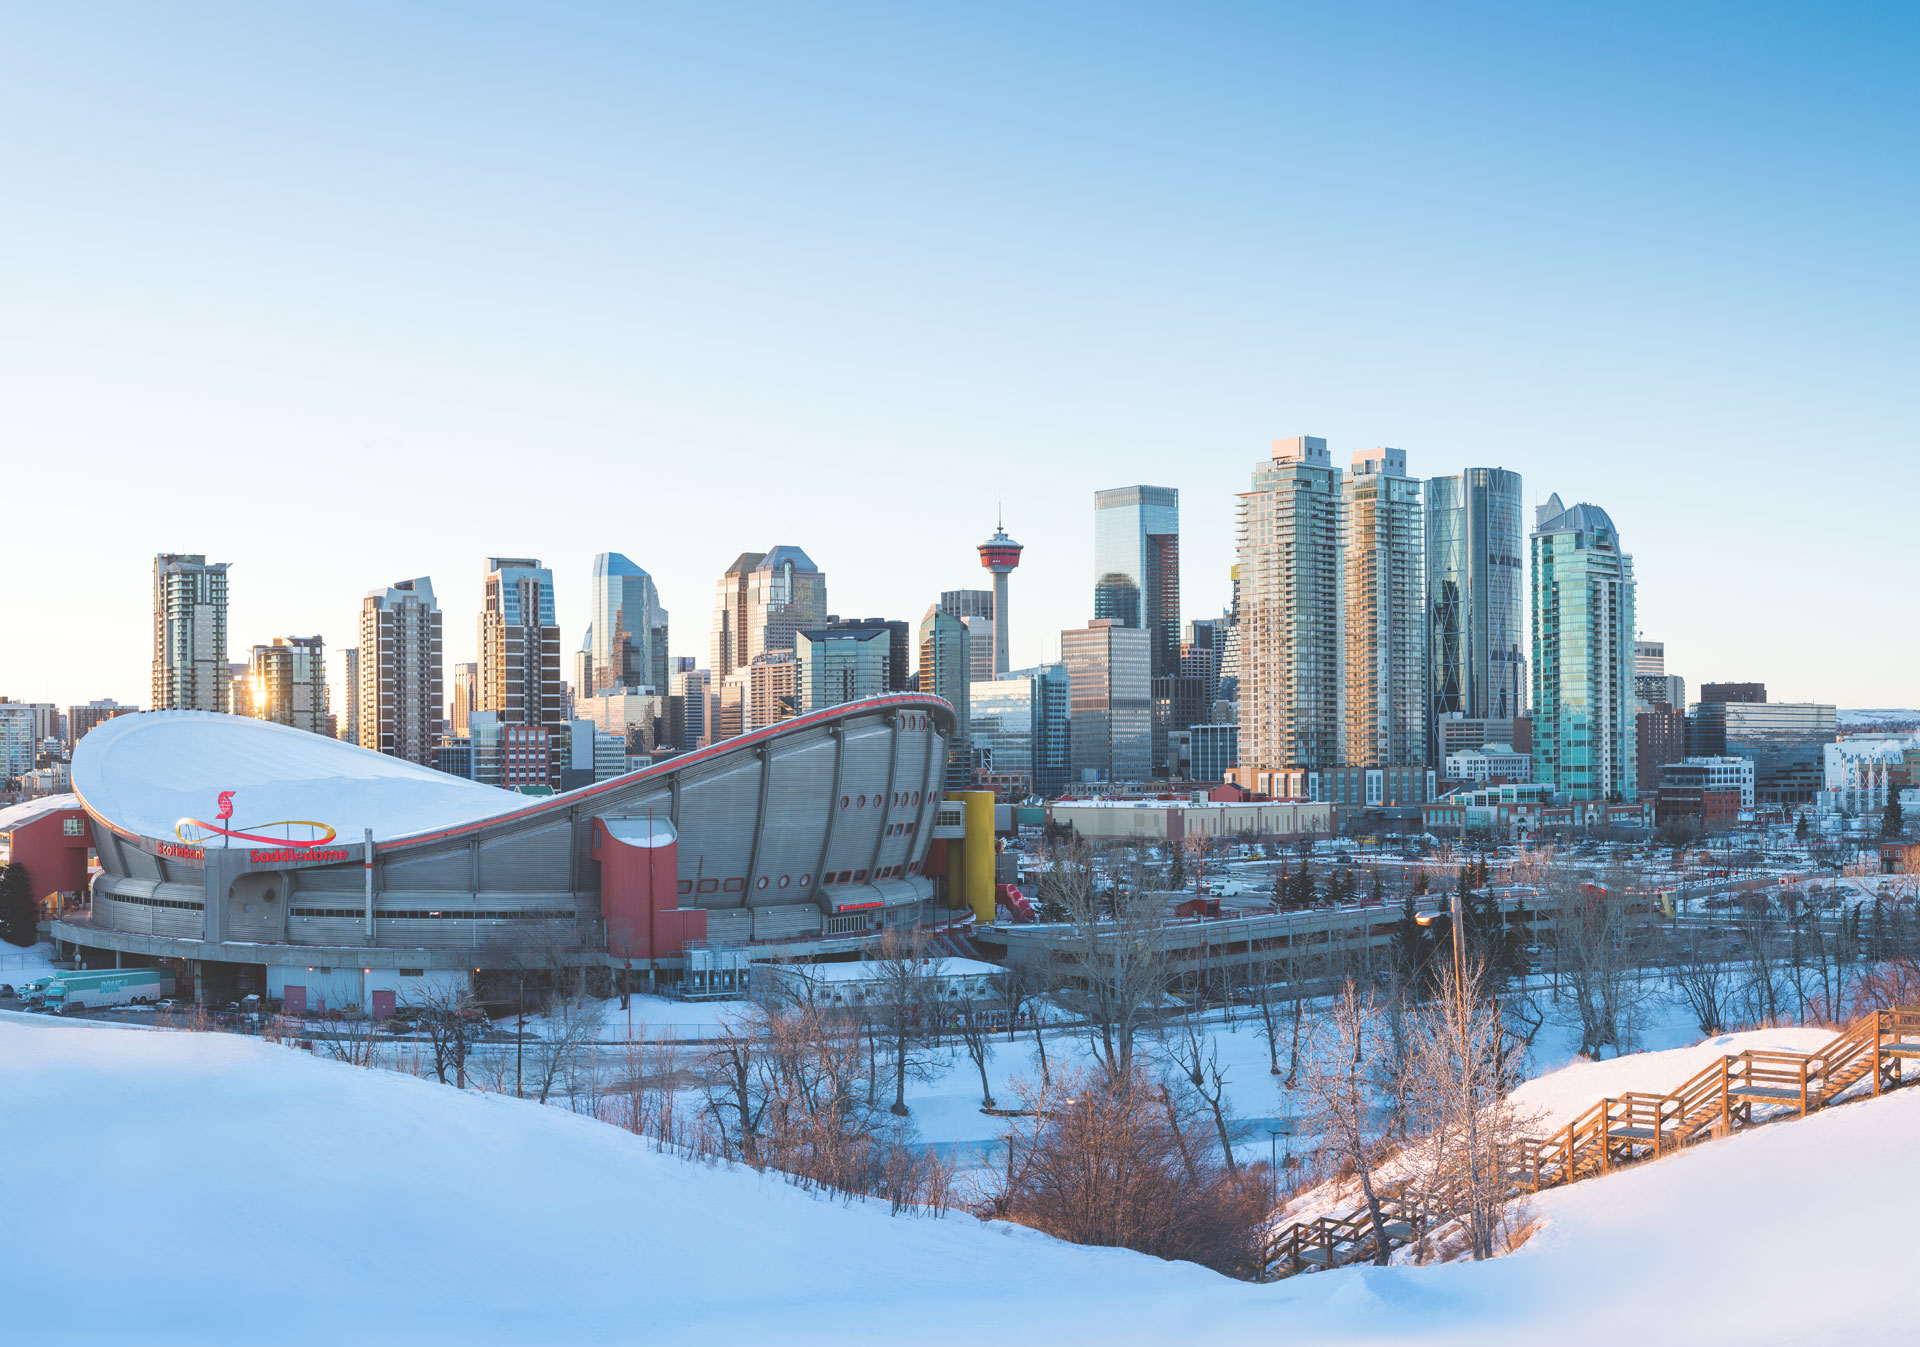 A winter day in Calgary